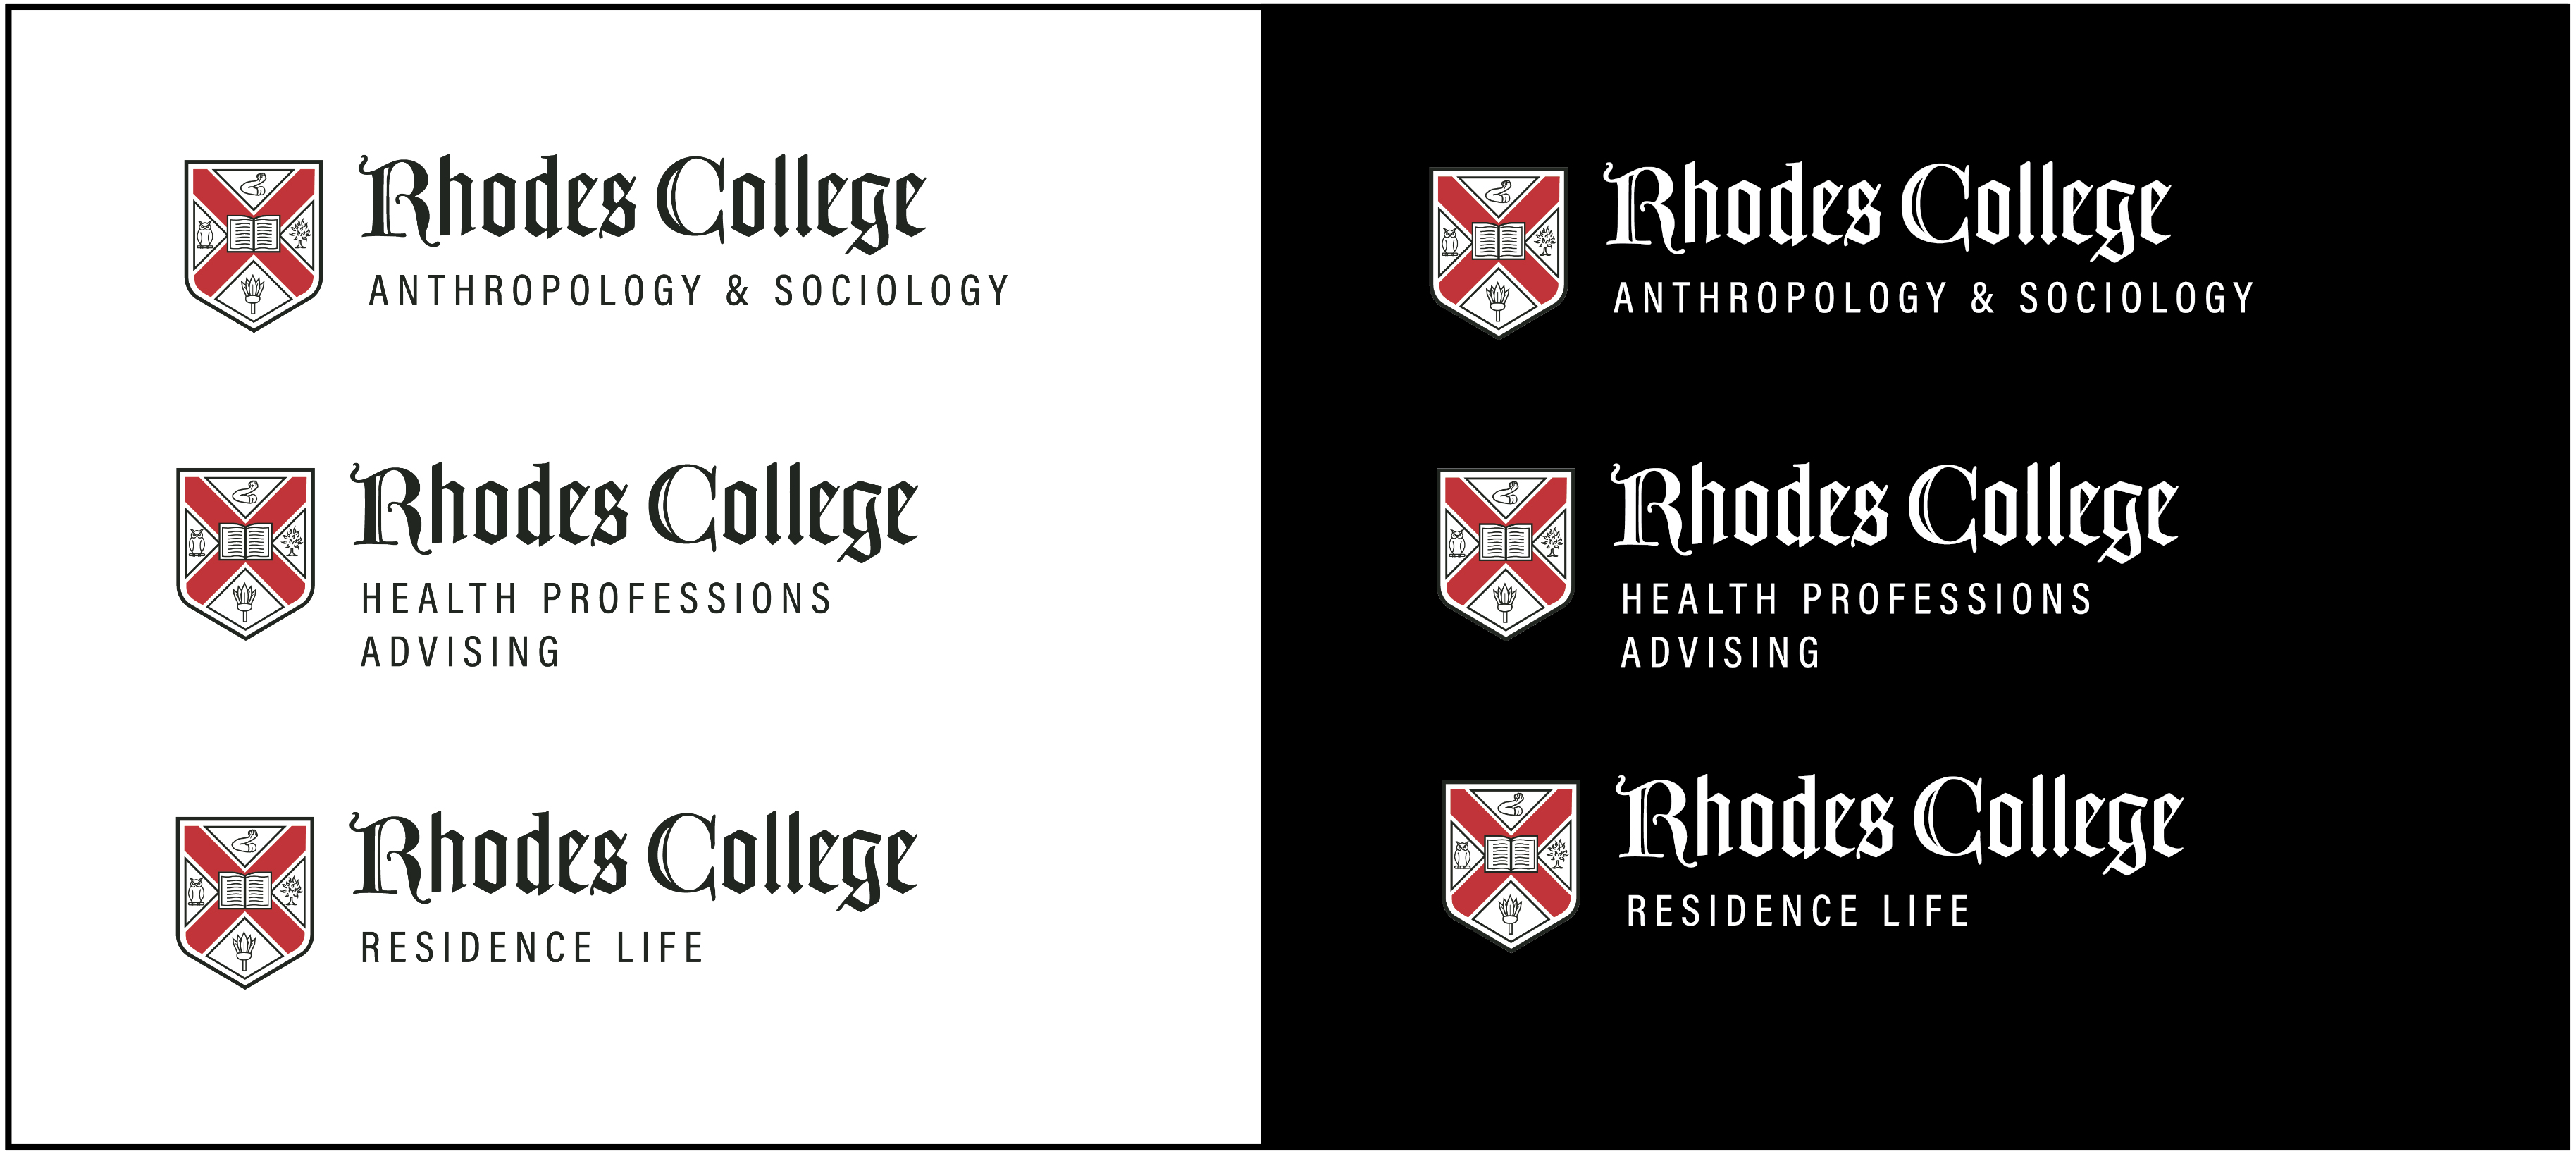 color variations of the logo